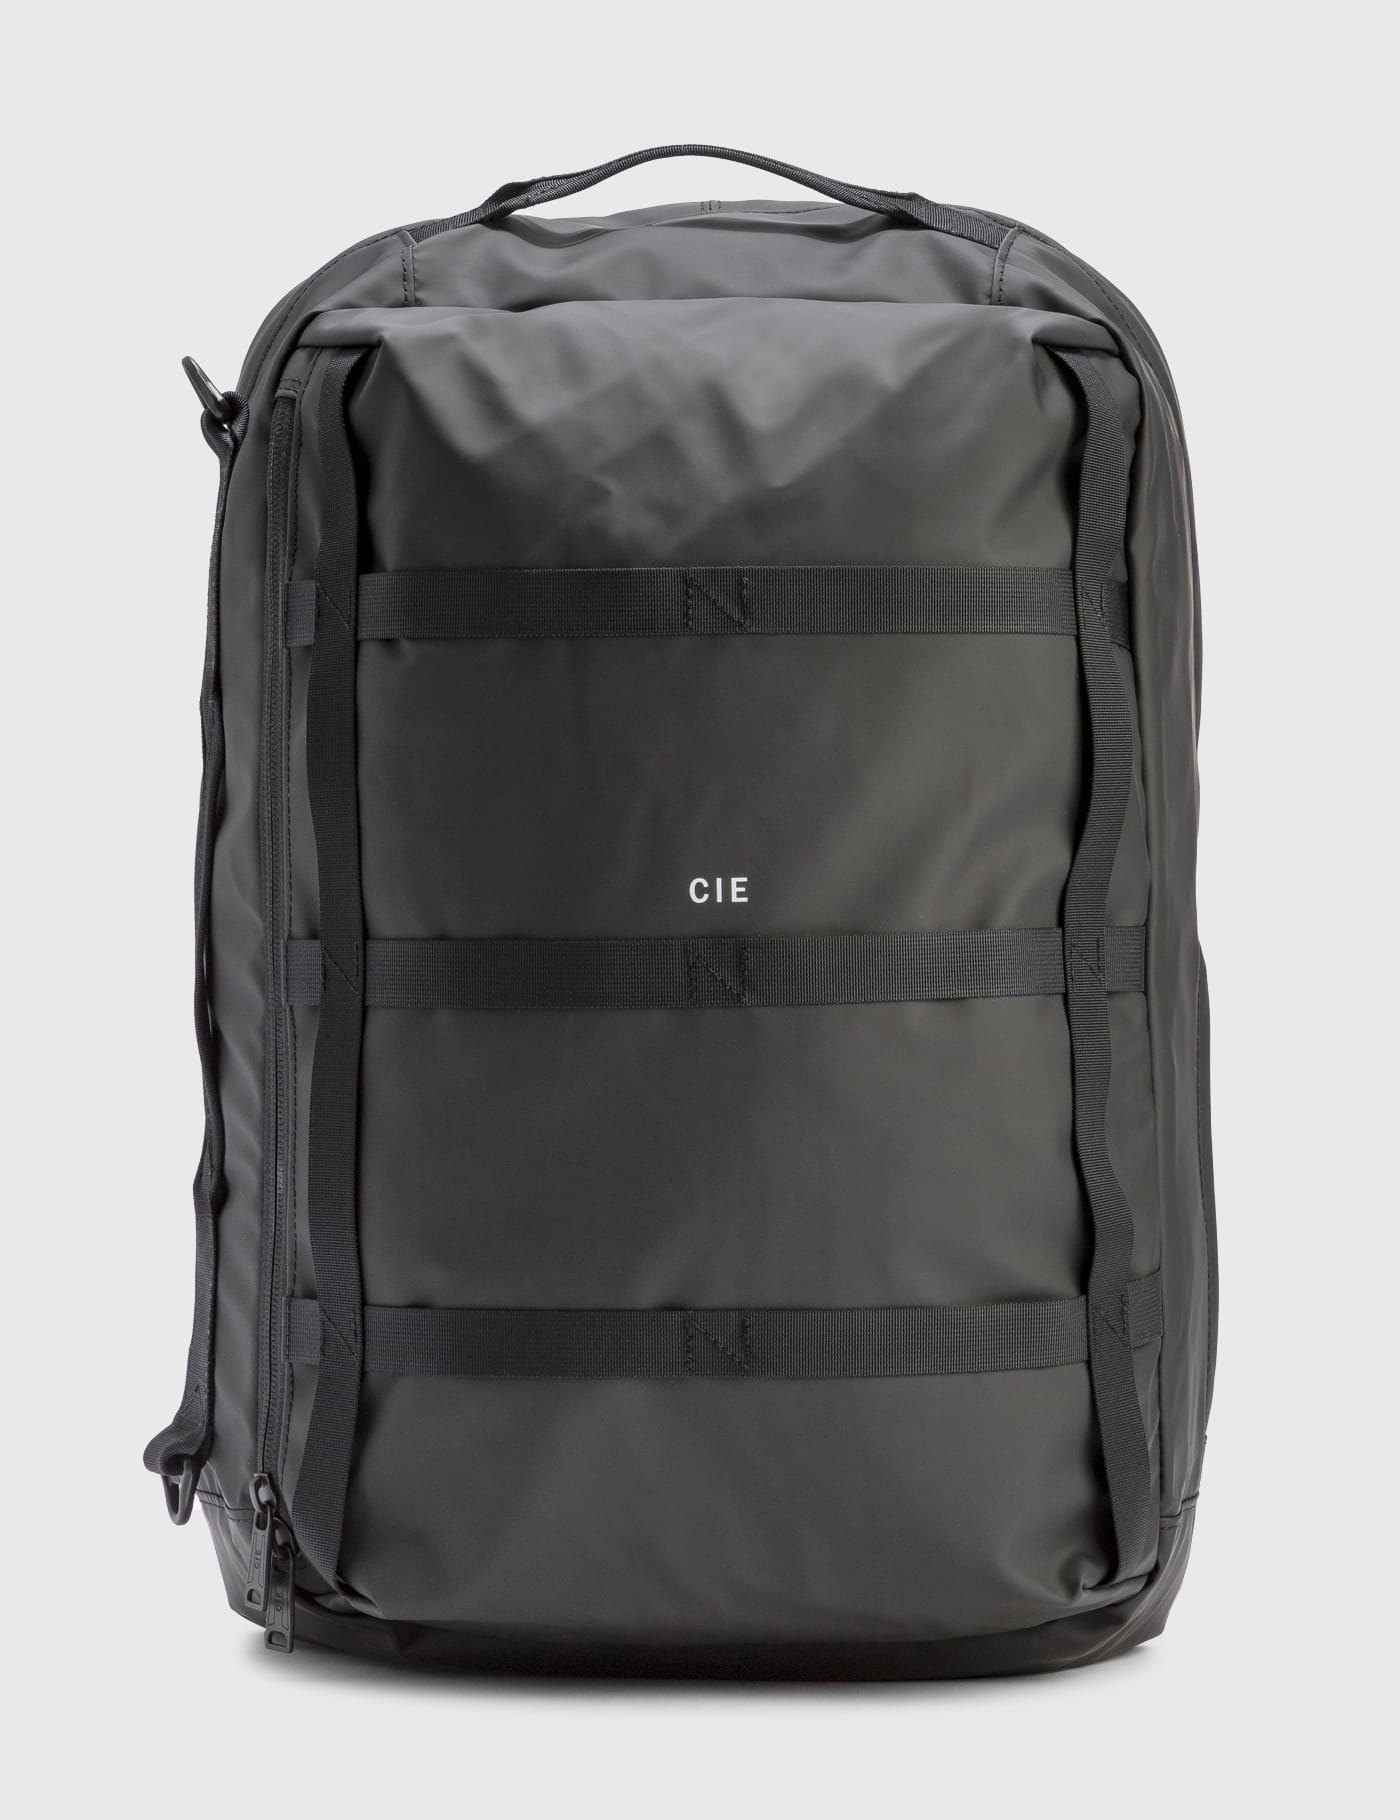 CIE - Grid 3 2-way Backpack | HBX - Globally Curated Fashion and